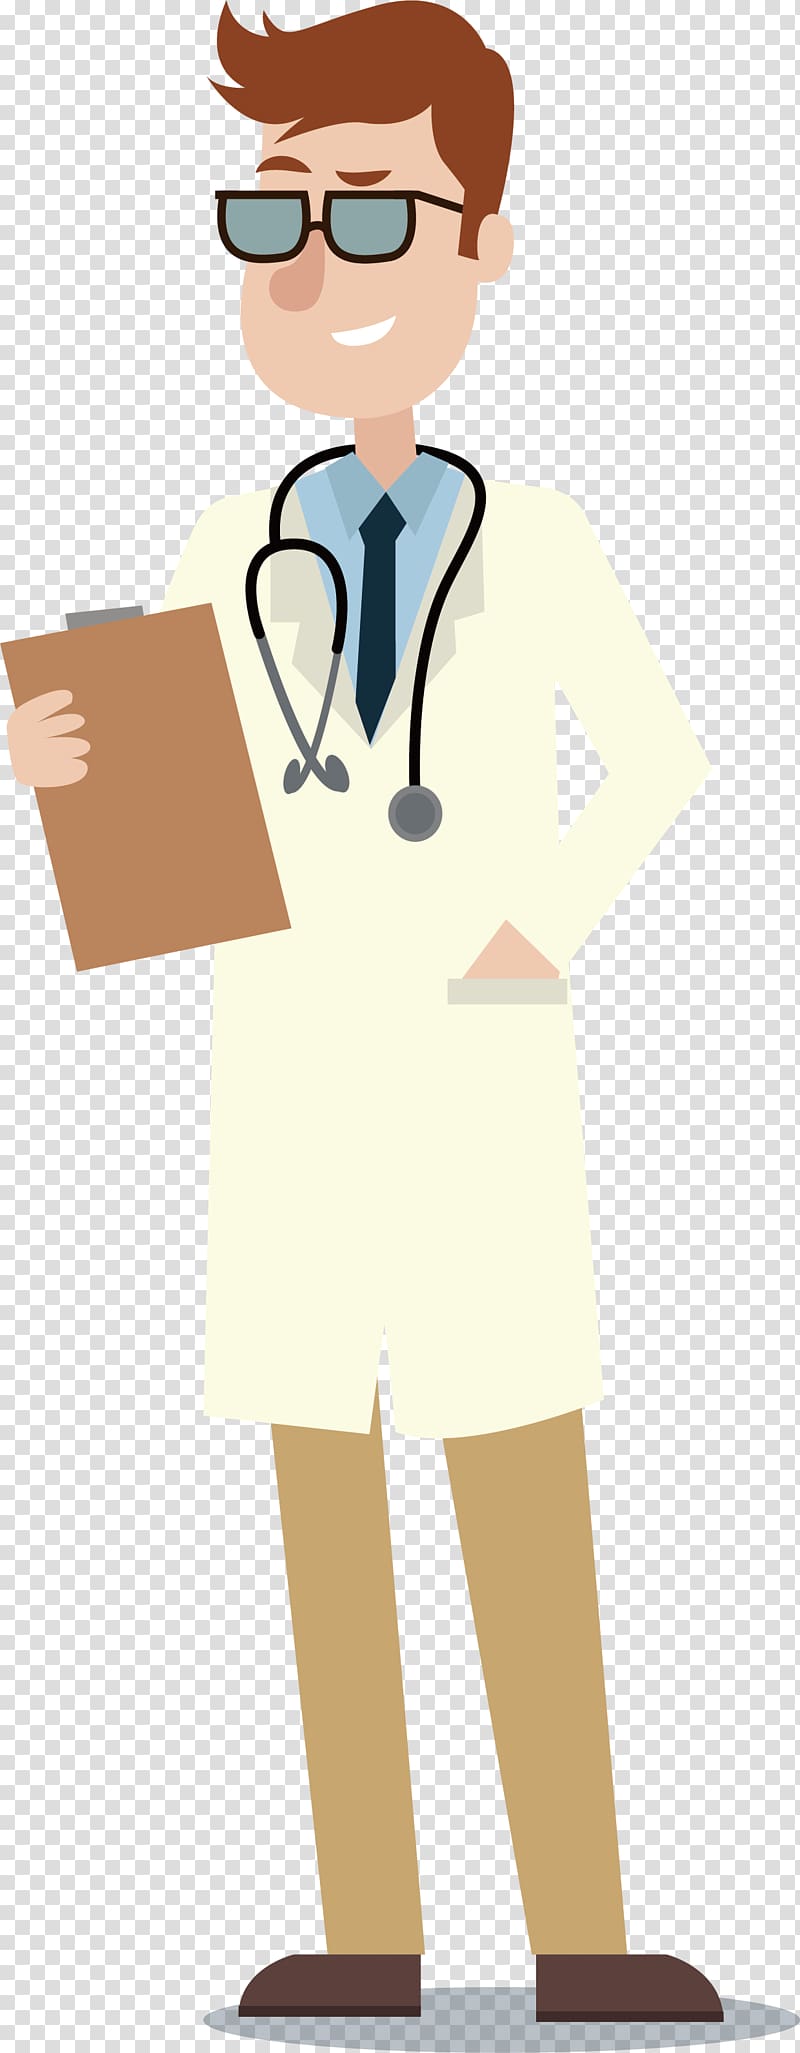 Glasses Physician, Wear glasses, doctor transparent background PNG clipart